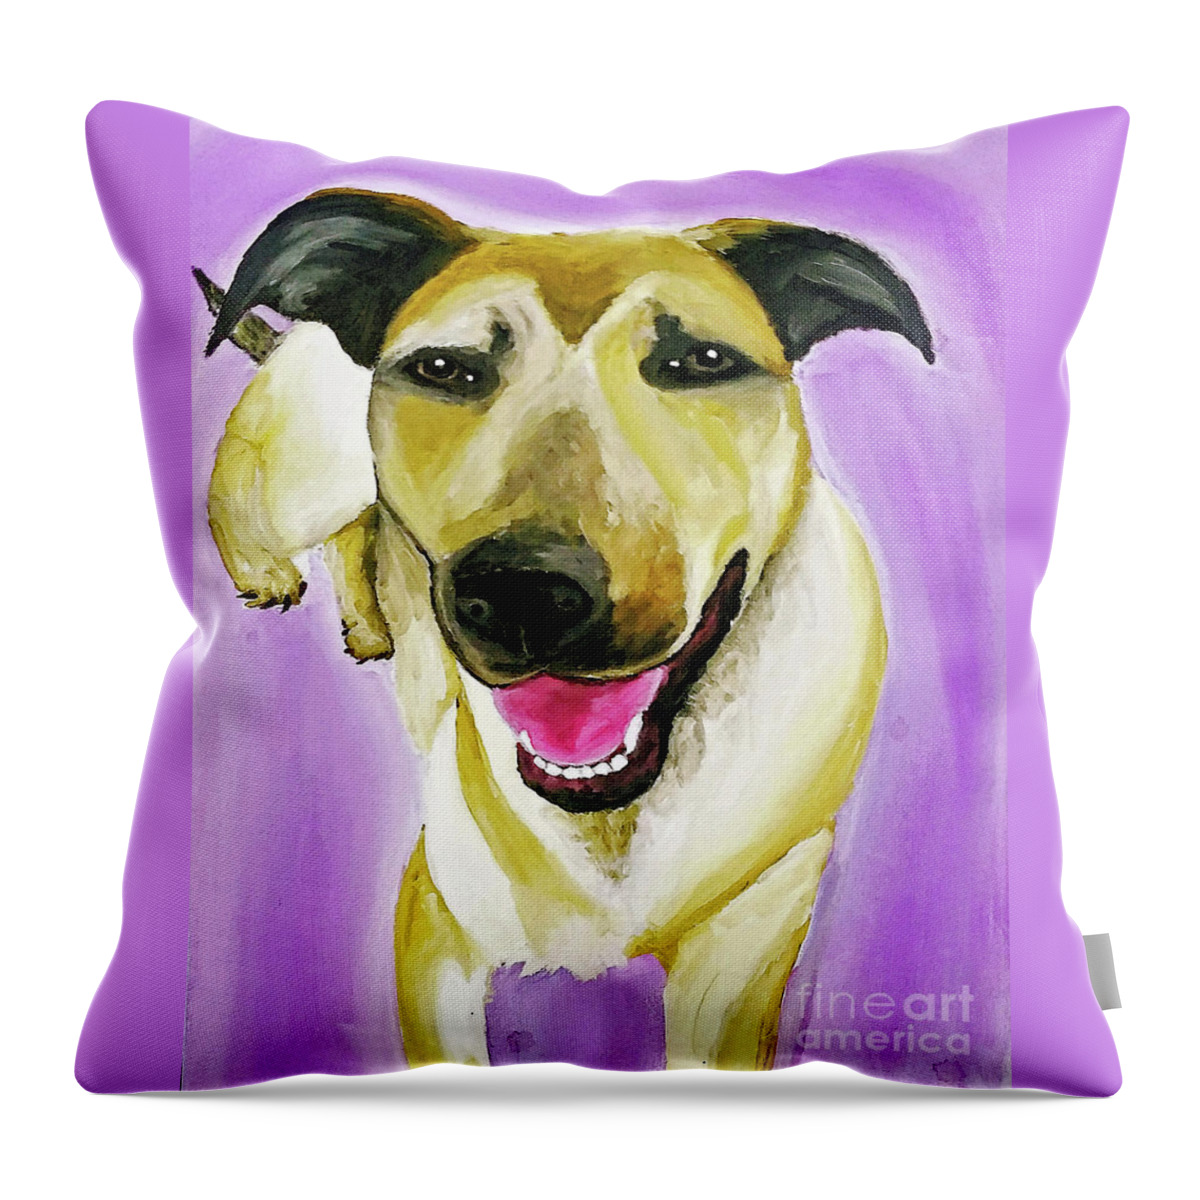 Pet Portrait Throw Pillow featuring the painting Thor Date With Paint Jan 22 by Ania M Milo